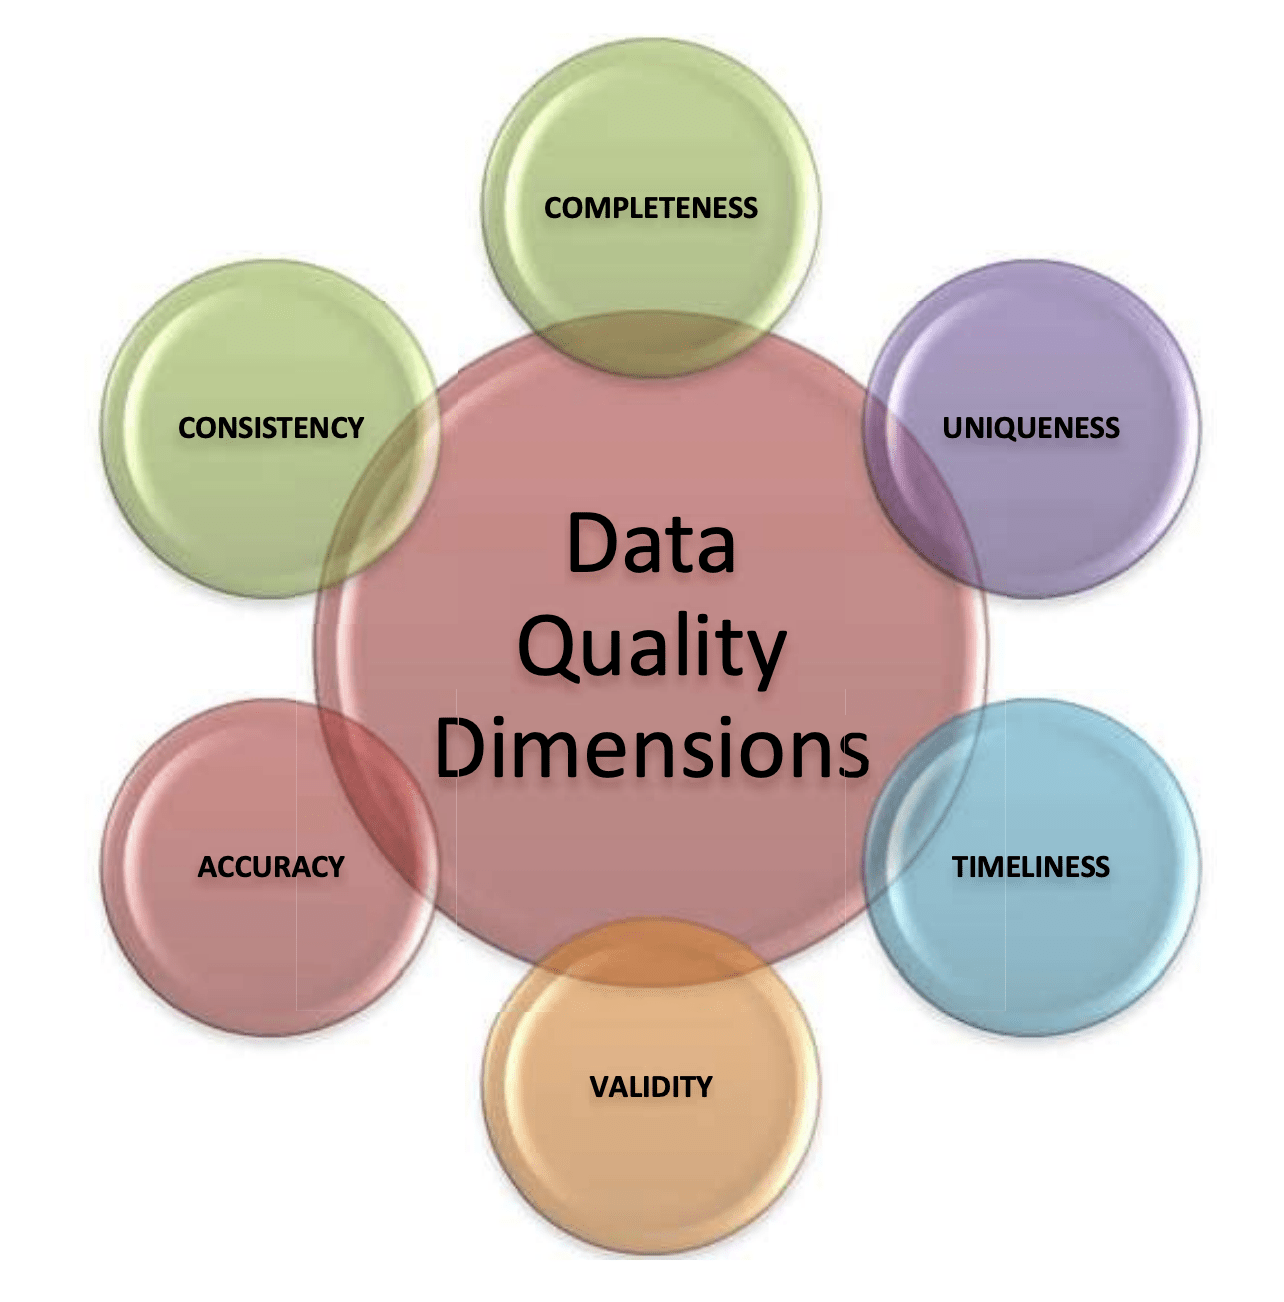 Dimensions of data quality